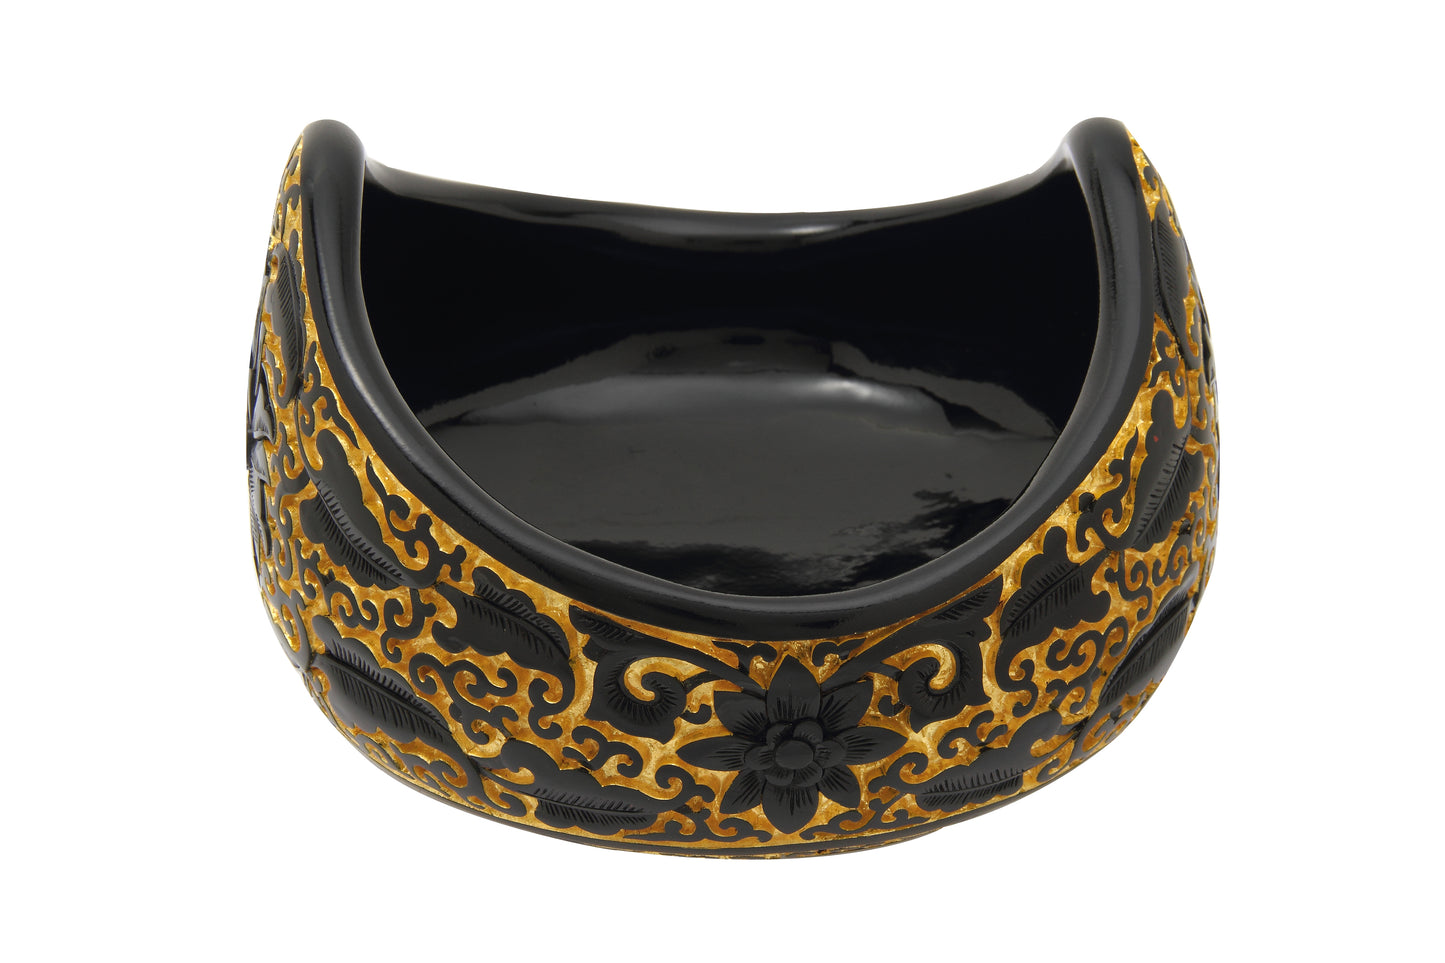 Black Lacquer bowl with Gold Leaf